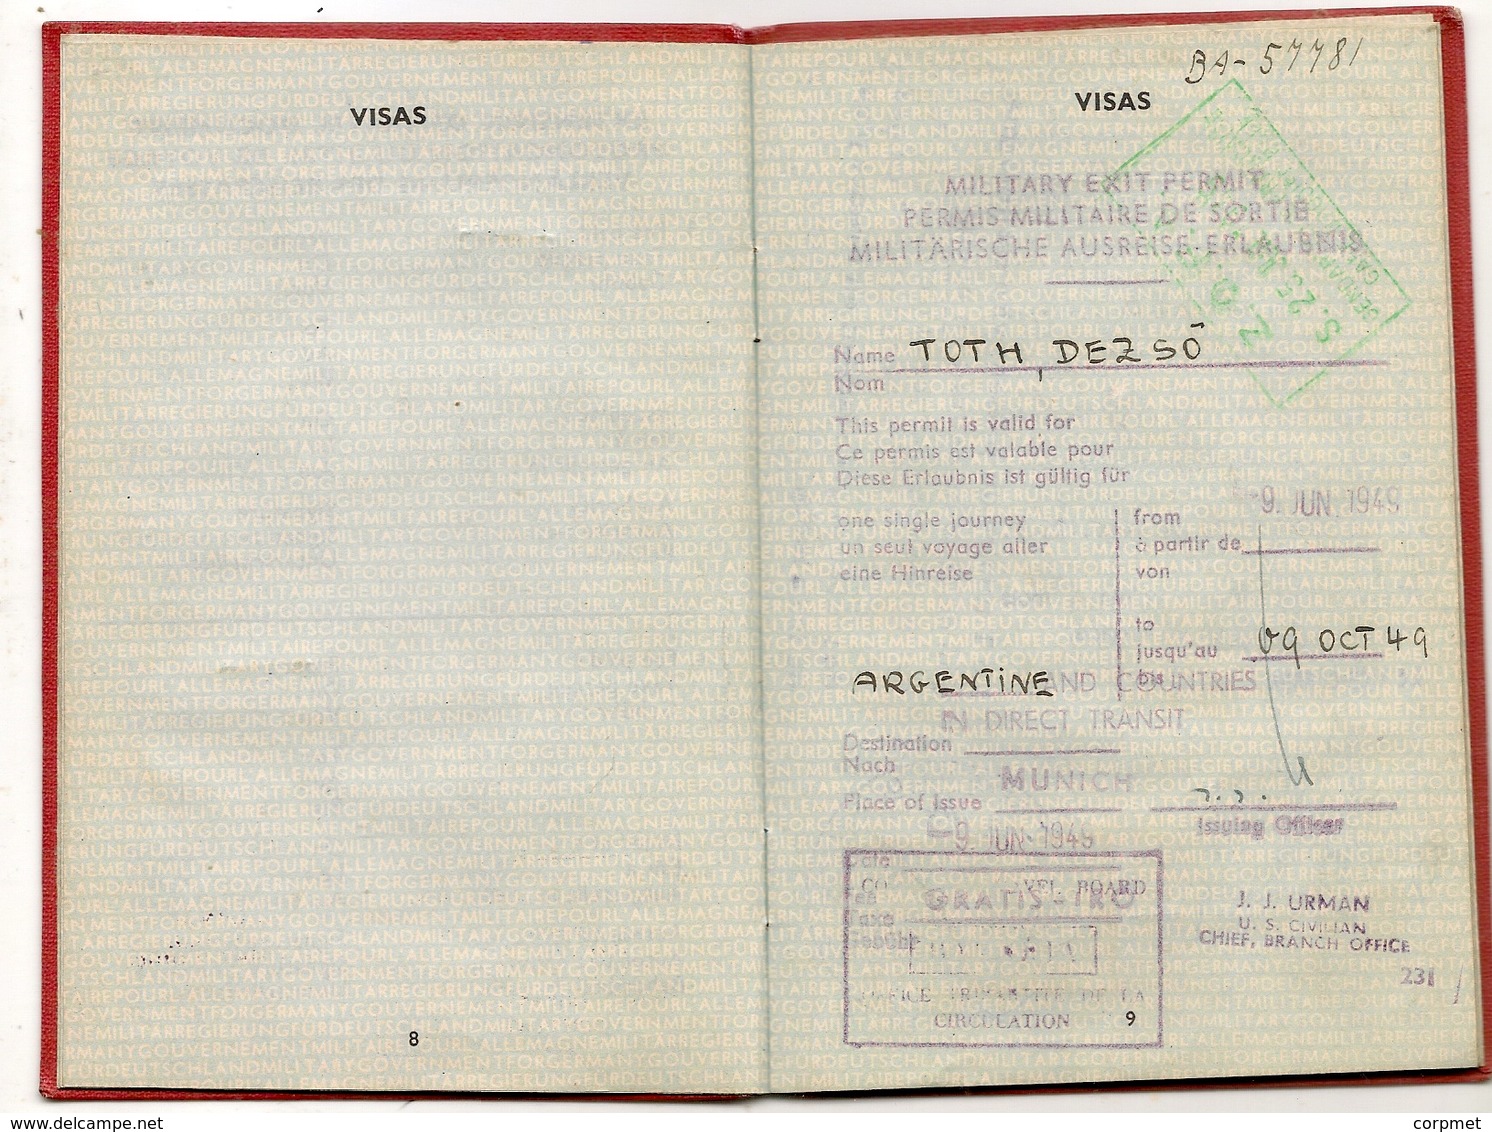 MILITARY GOVERNMENT FOR GERMANY 1949 -PASSPORT - PASSEPORT For Hungarian TOTH DEZSO Exit Permit To ARGENTINA -NOT COMMON - Historical Documents